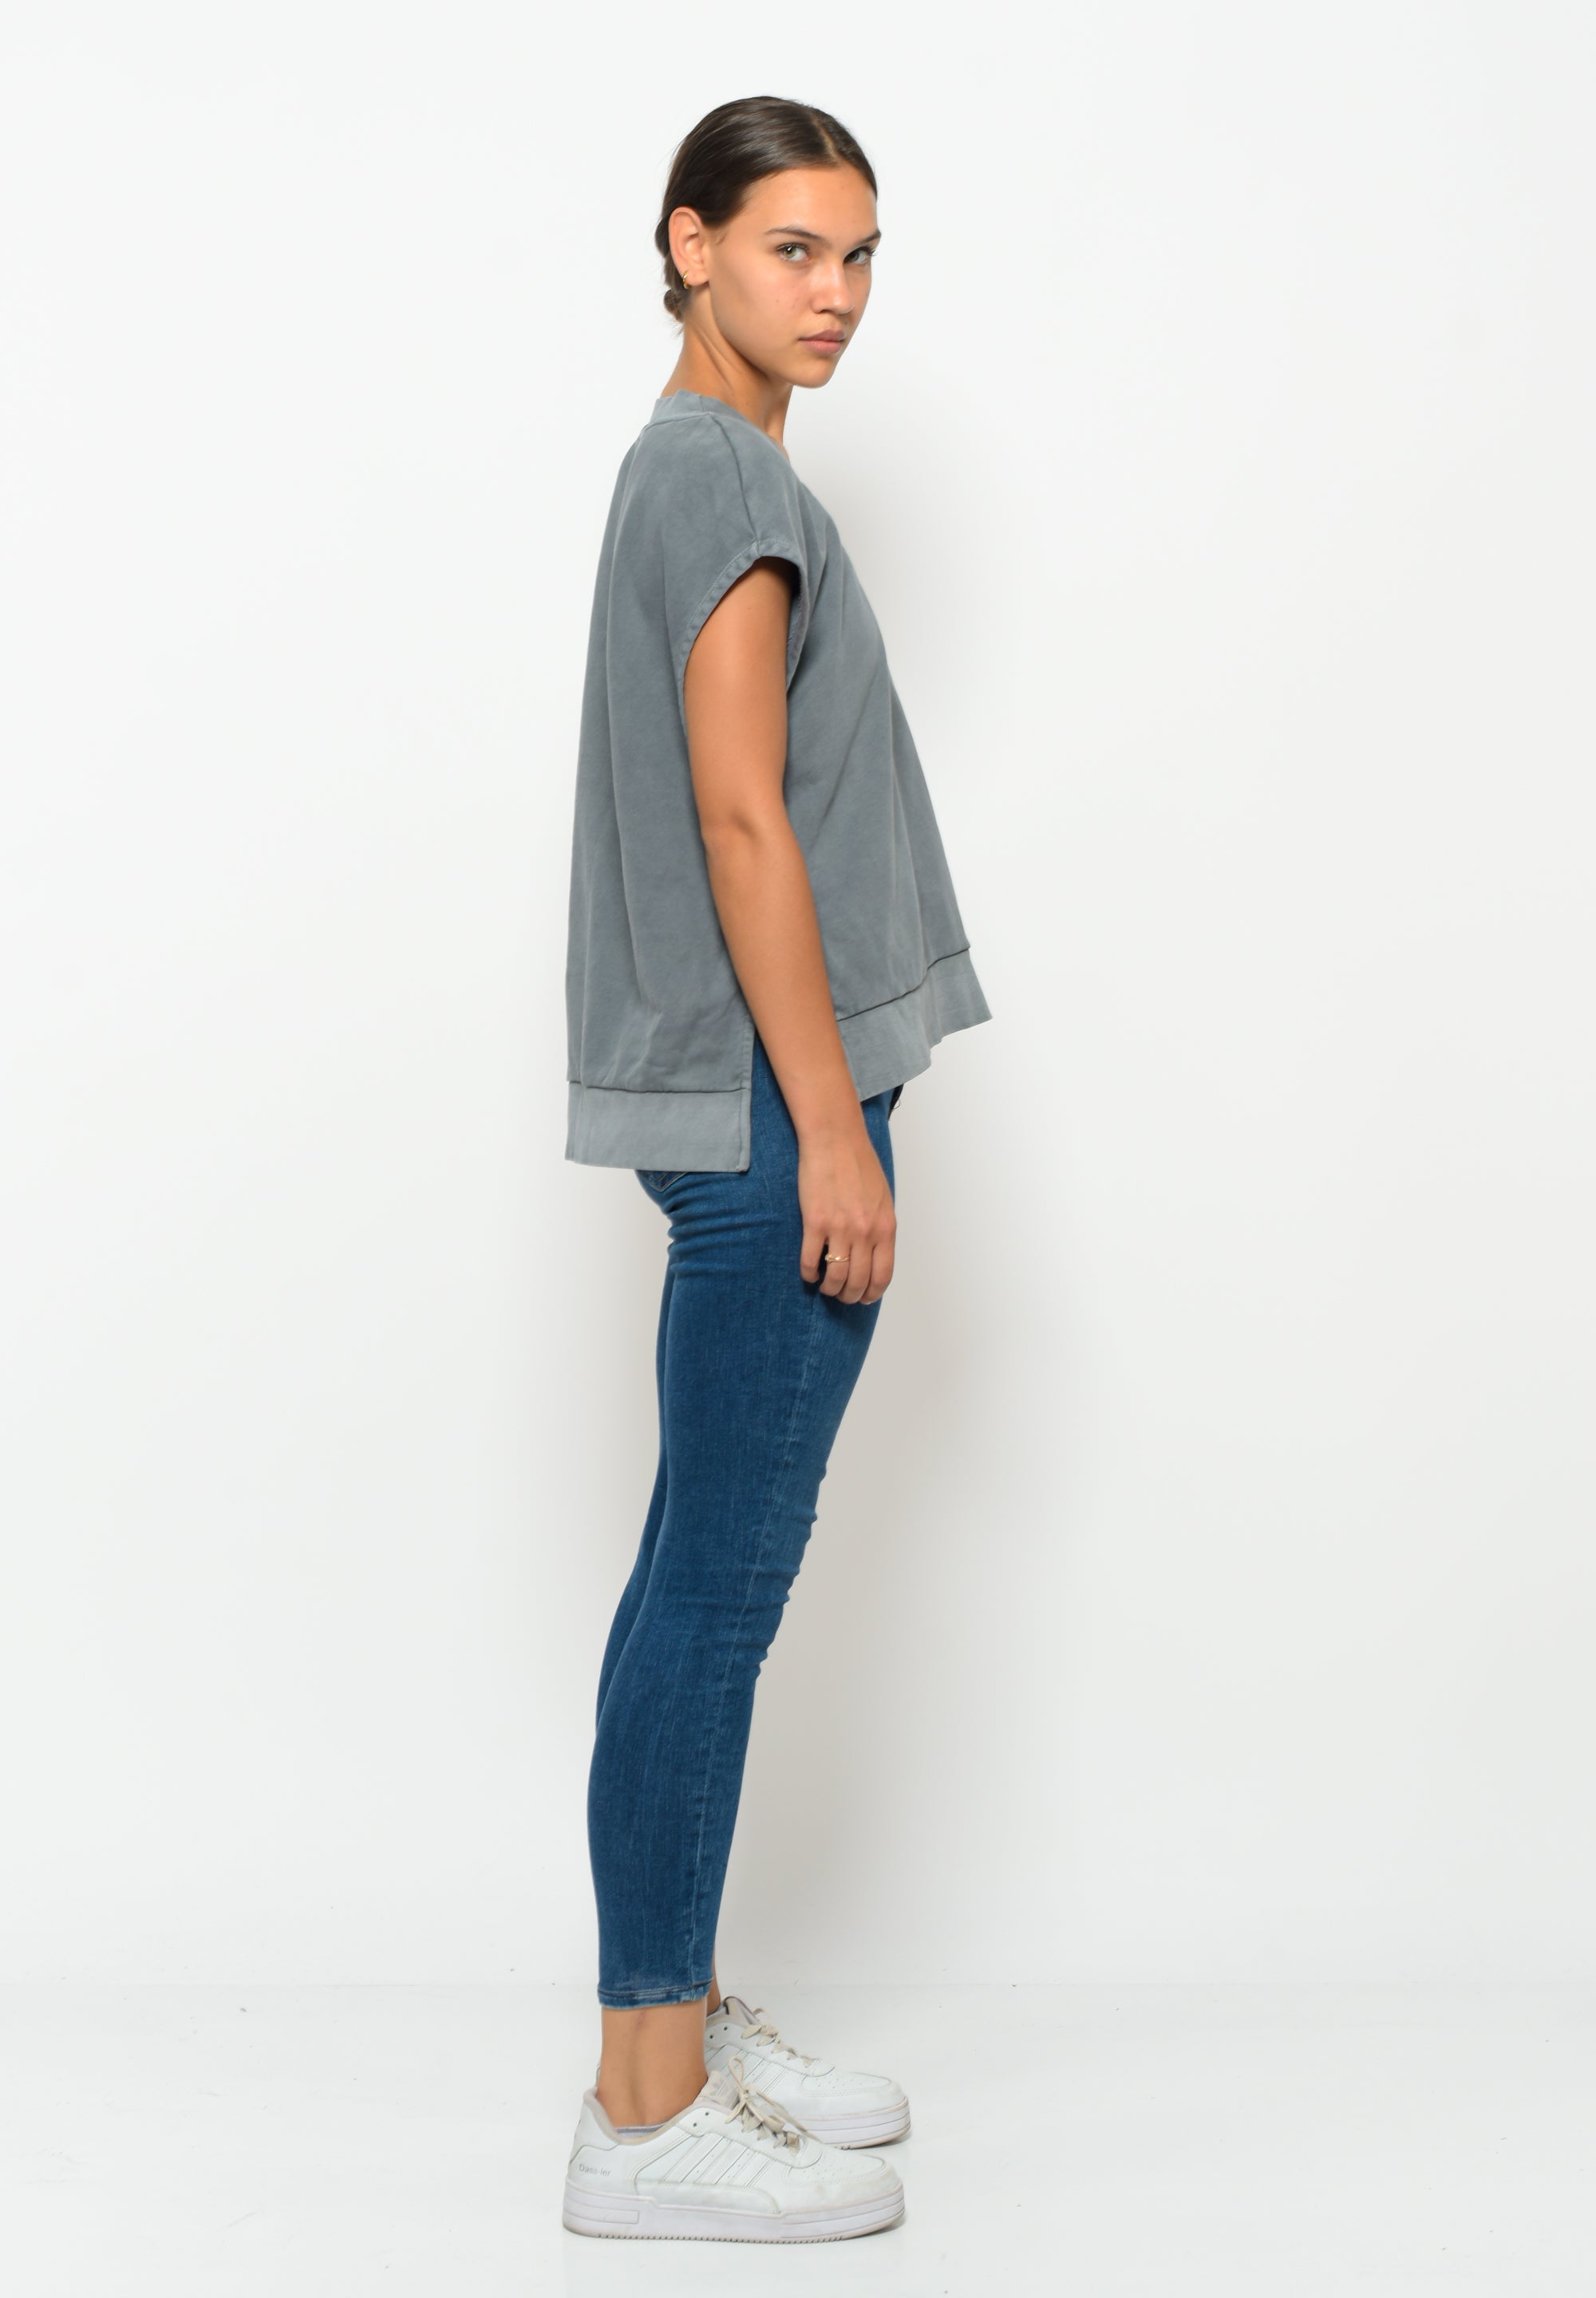 SOMWR INSPIRE Sweater GRY013